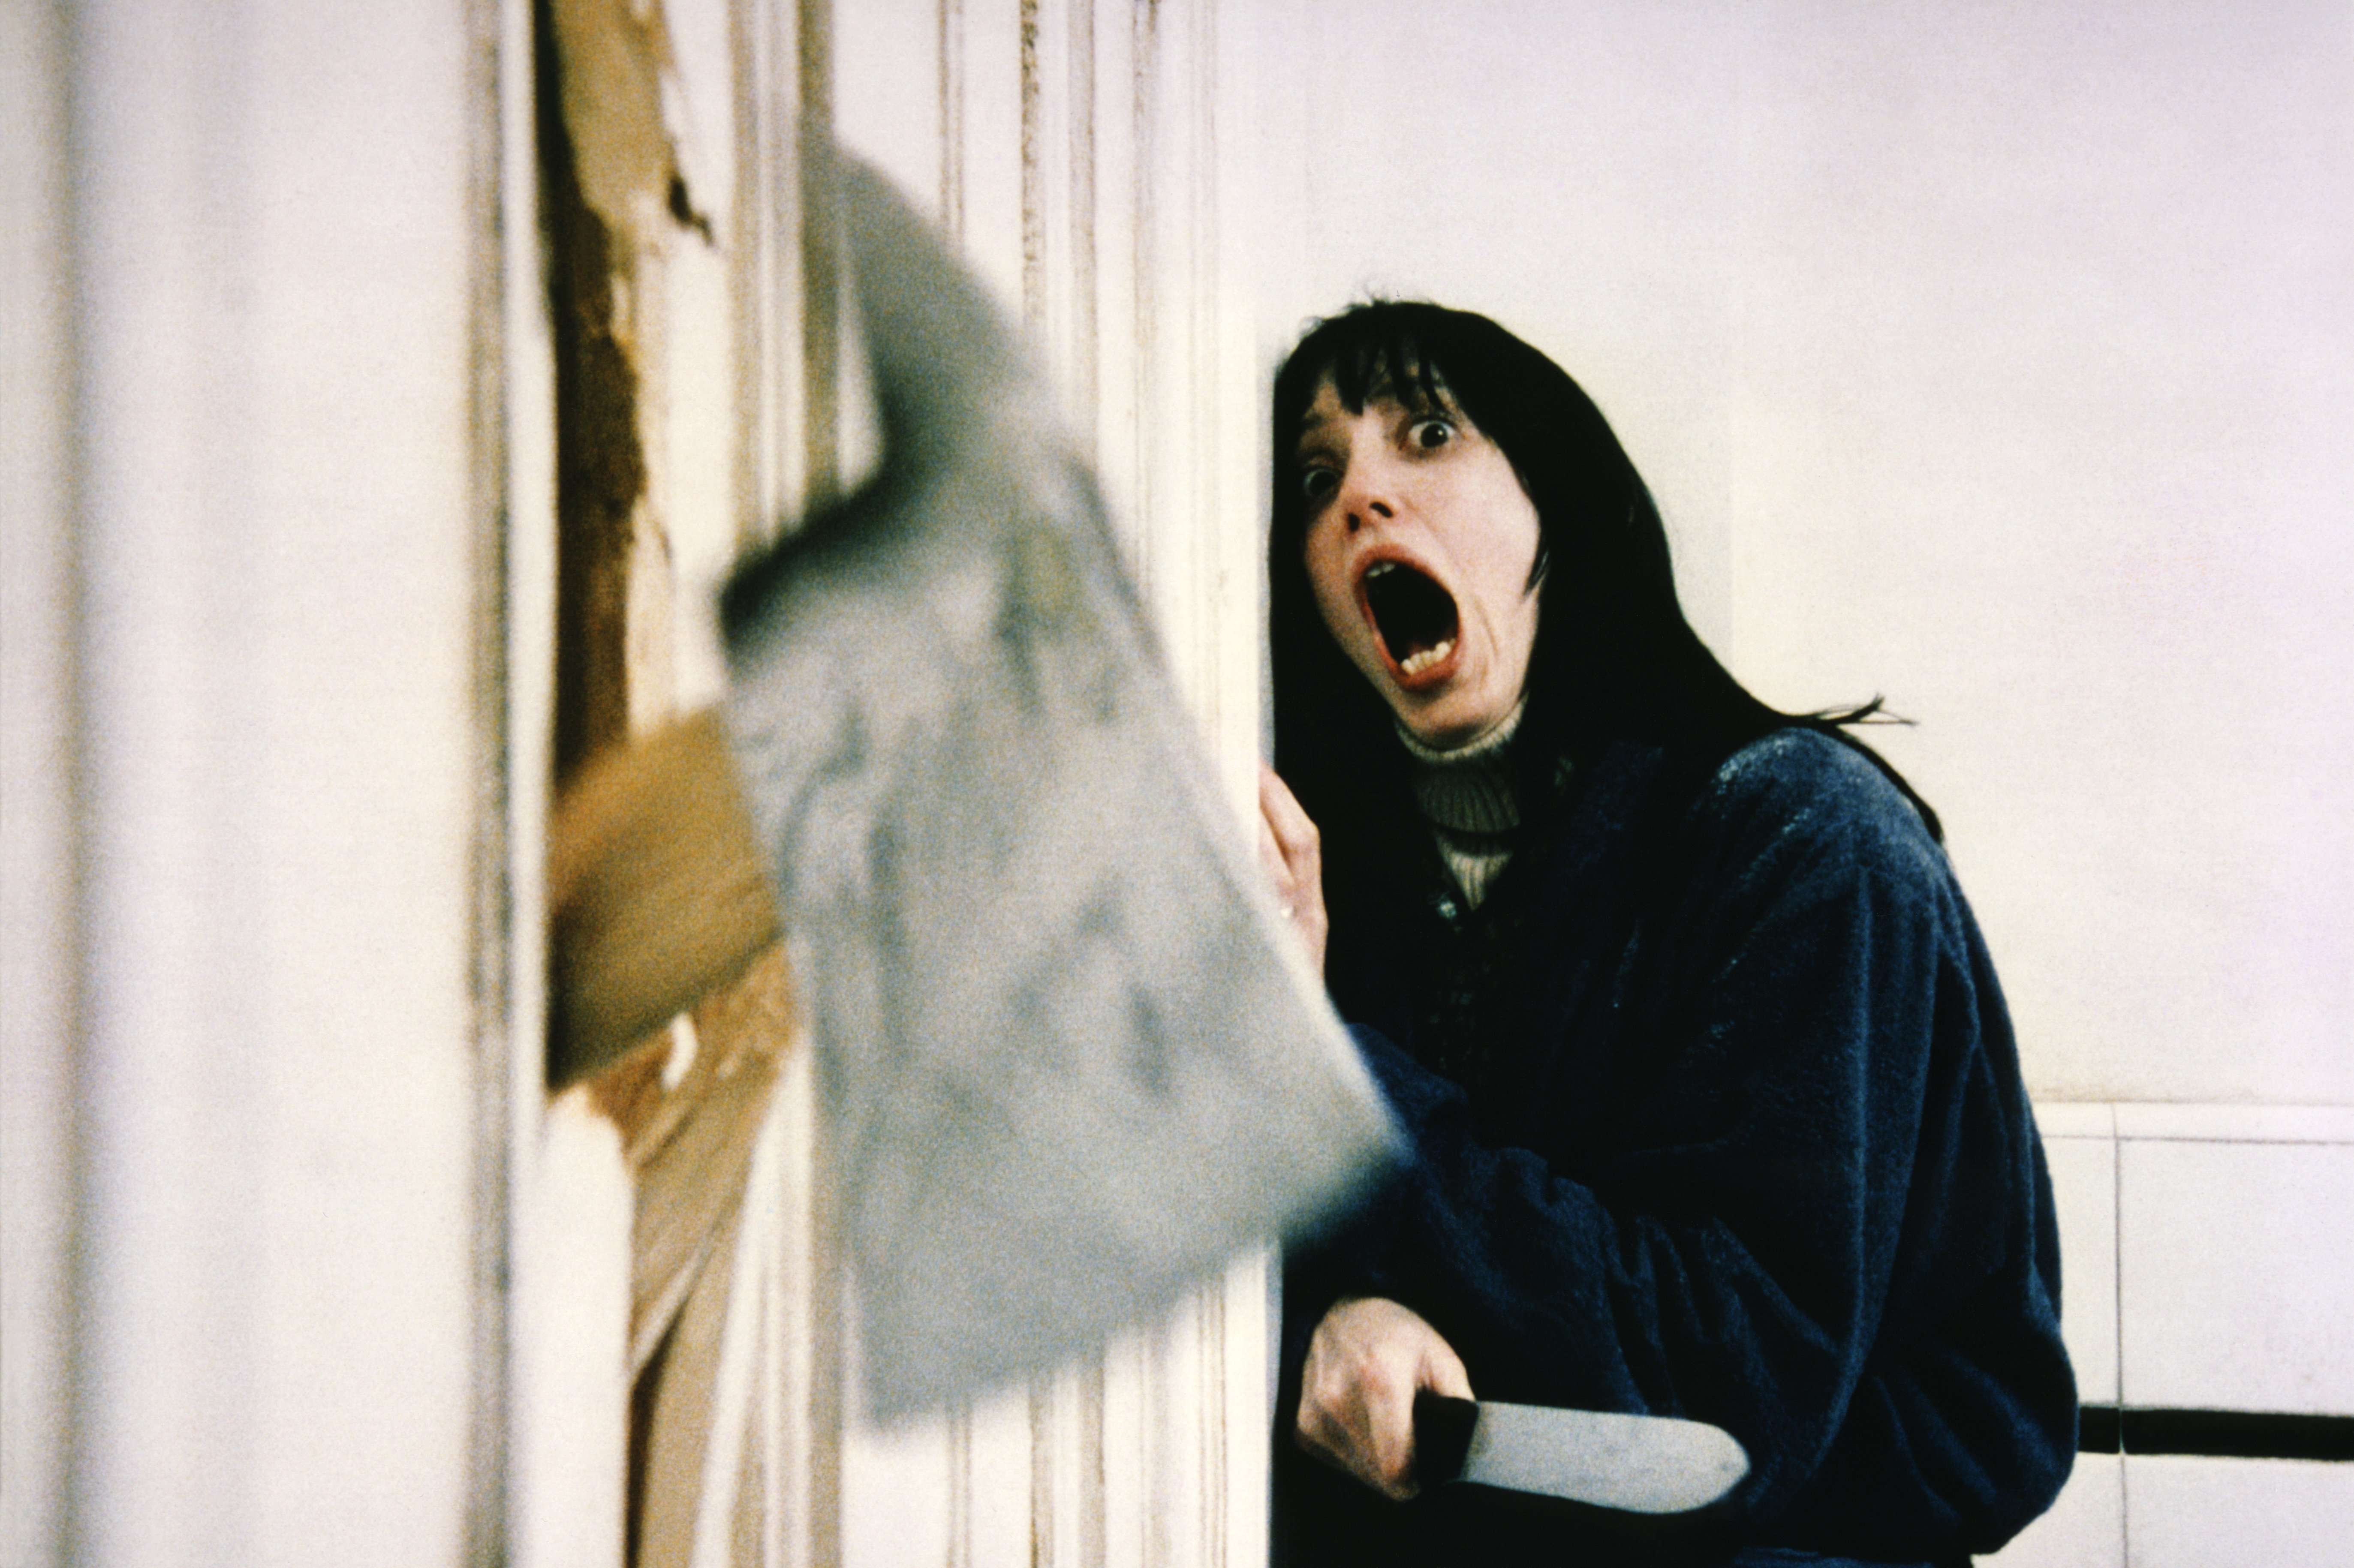 Shelley Duvall in "The Shining," 1980 | Source: Getty Images